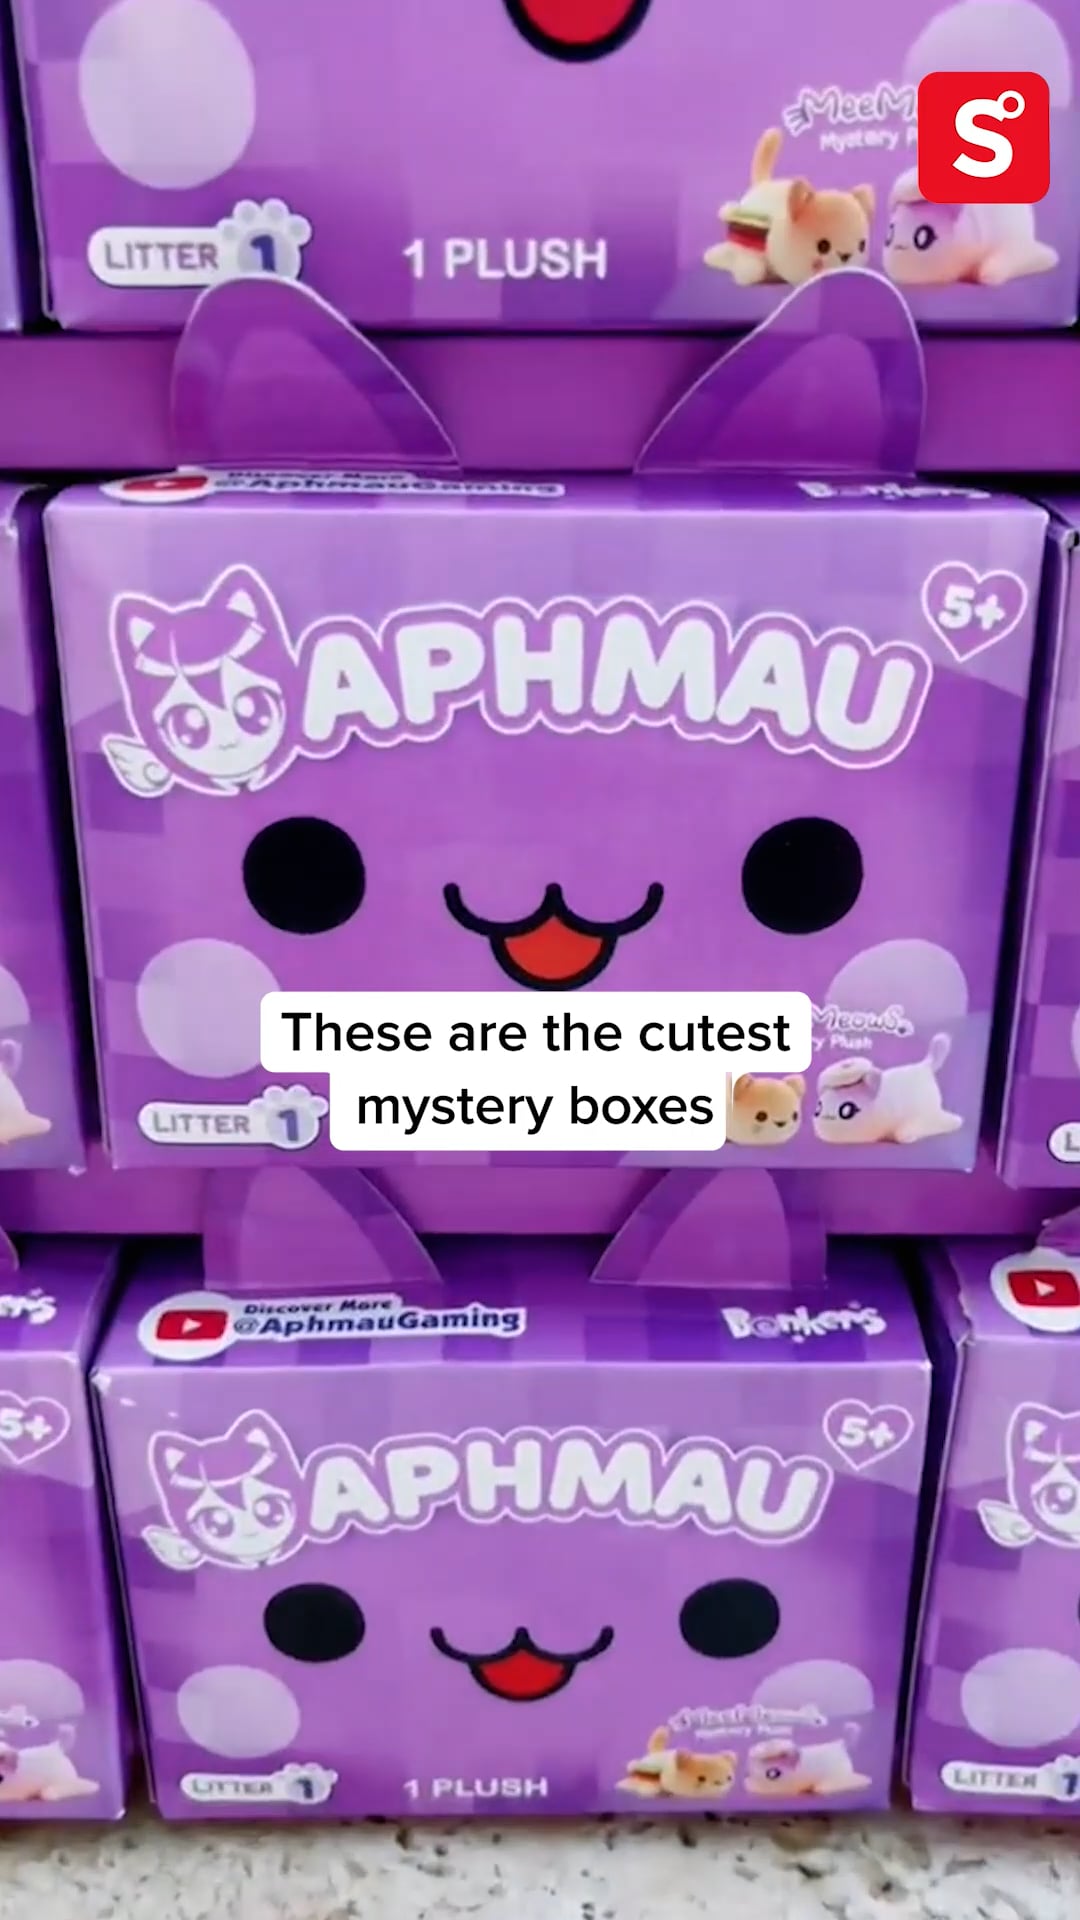 Bonkers Toys is introducing a BRAND NEW series of Aphmau Plush and